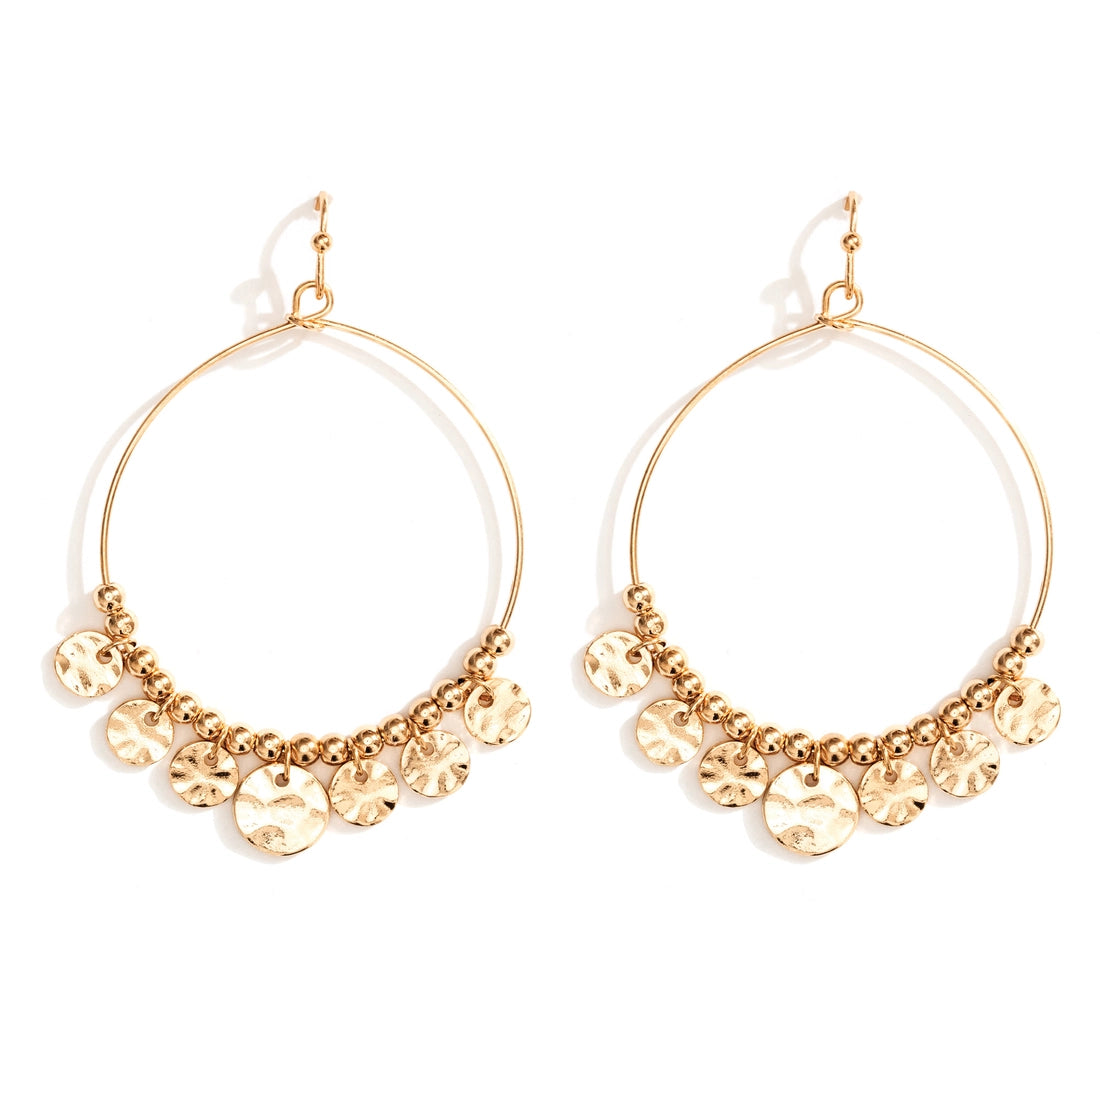 Open Circle Earrings with Beads - Gold